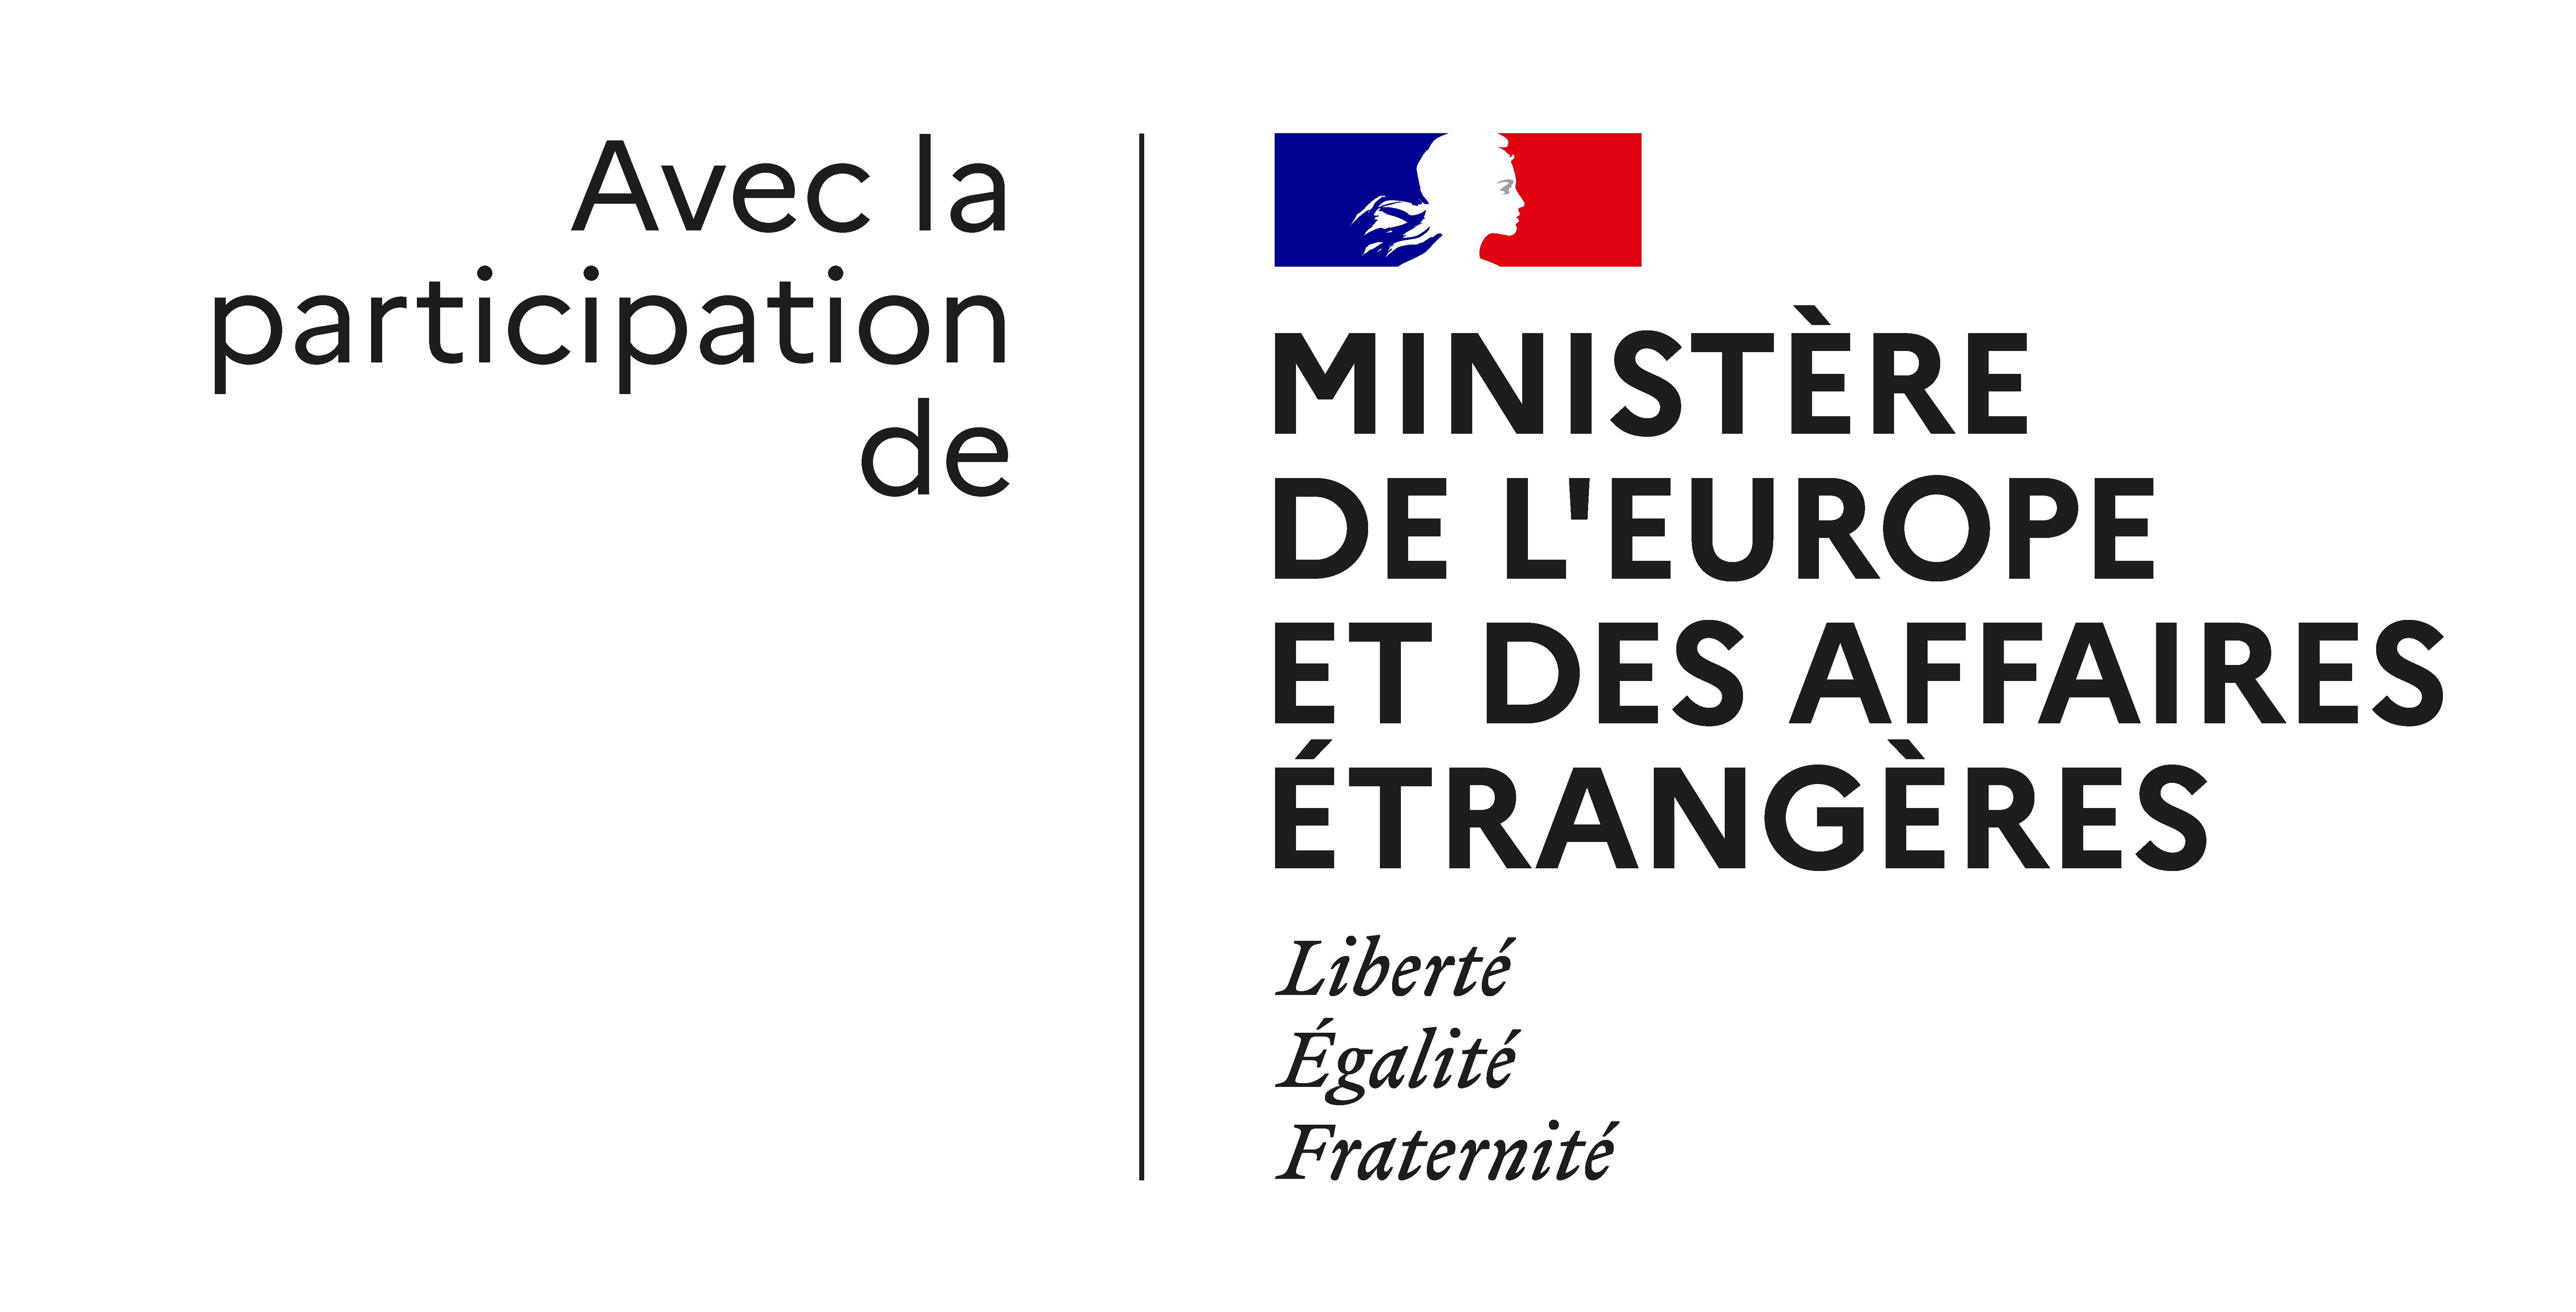 The Crisis and Support Center of the Ministry for Europe and Foreign Affairs of France logo